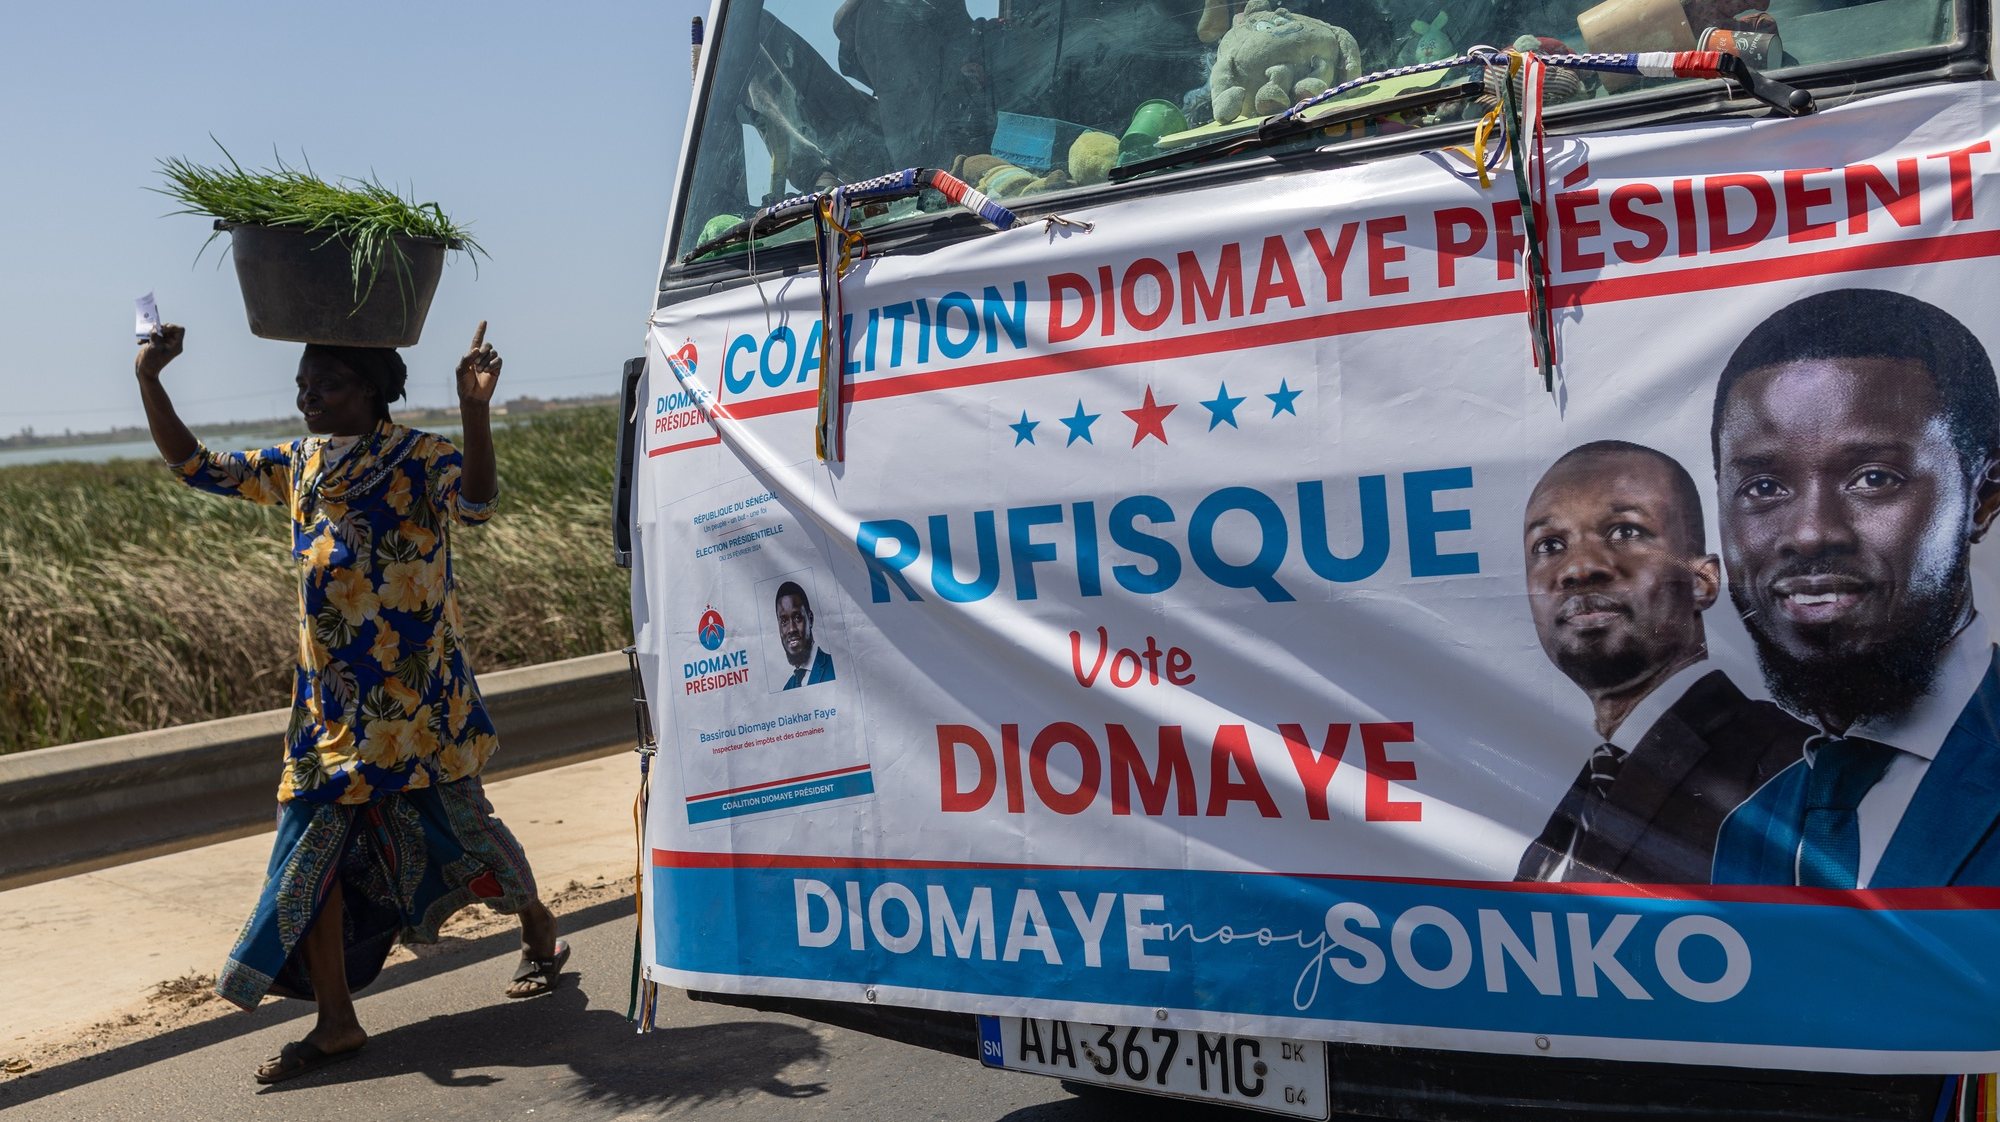 epa11216861 Supporters of opposition presidential candidate Bassirou Diomaye Faye take part in a campaign caravan to drum up support for Faye in Tivaouane Peulh, Senegal, 12 March 2024. Faye, of the dissolved party PASTEF (African Patriots of Senegal for Work, Ethics and Fraternity), is running in place of jailed Senegalese opposition Ousmane Sonko. Sonko and Faye are currently in prison, but Faye could be freed according to a recently passed amnesty law for political prisoners. The presidential election will take place on 24 March.  EPA/JEROME FAVRE